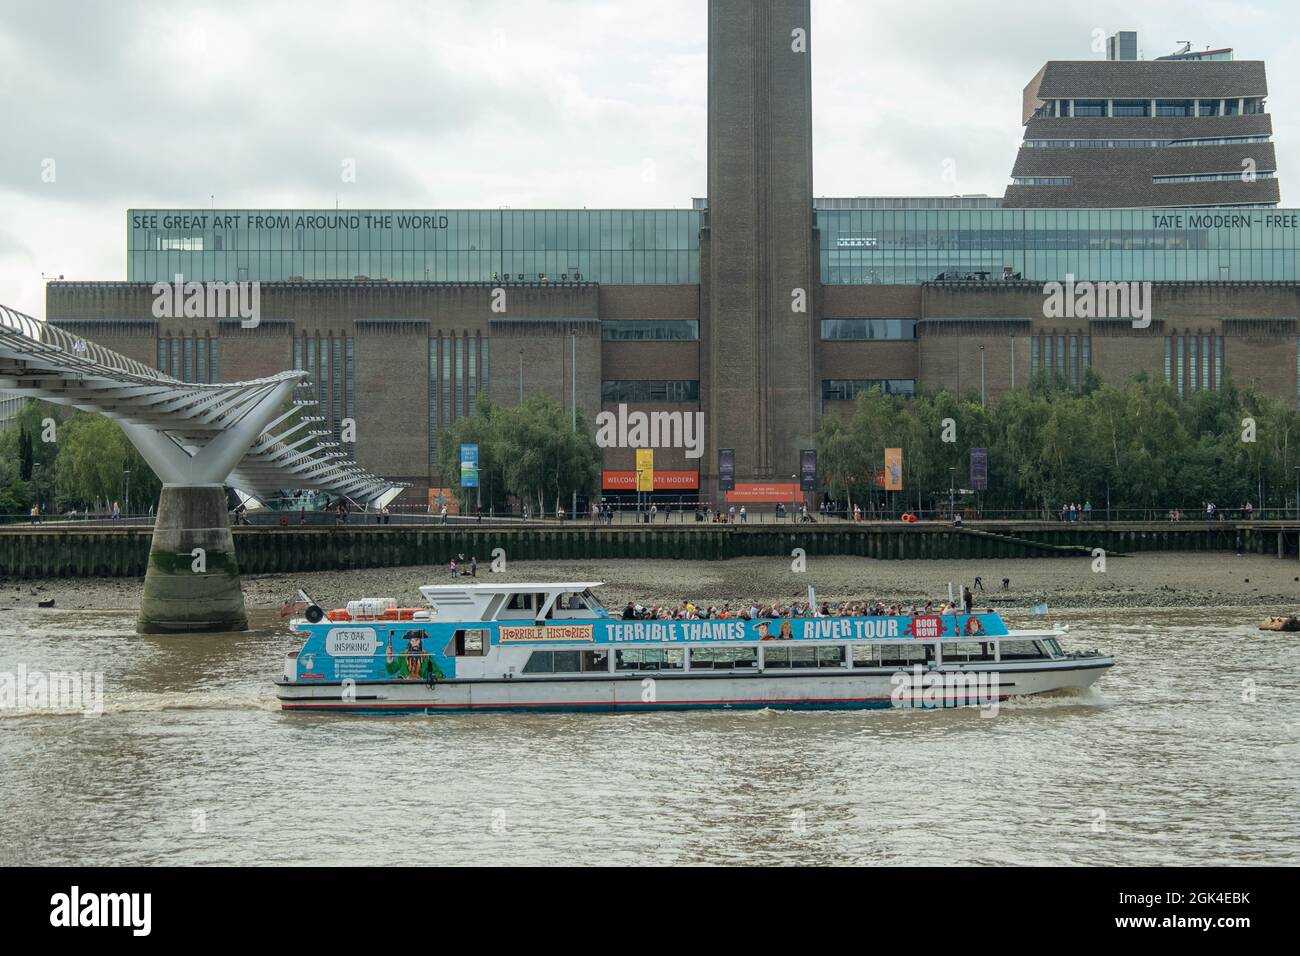 London, September, 2021: The Terrible Thames river boat tour cruising past the Tate Modern. A theatrical river cruise tour and popular tourist activit Stock Photo